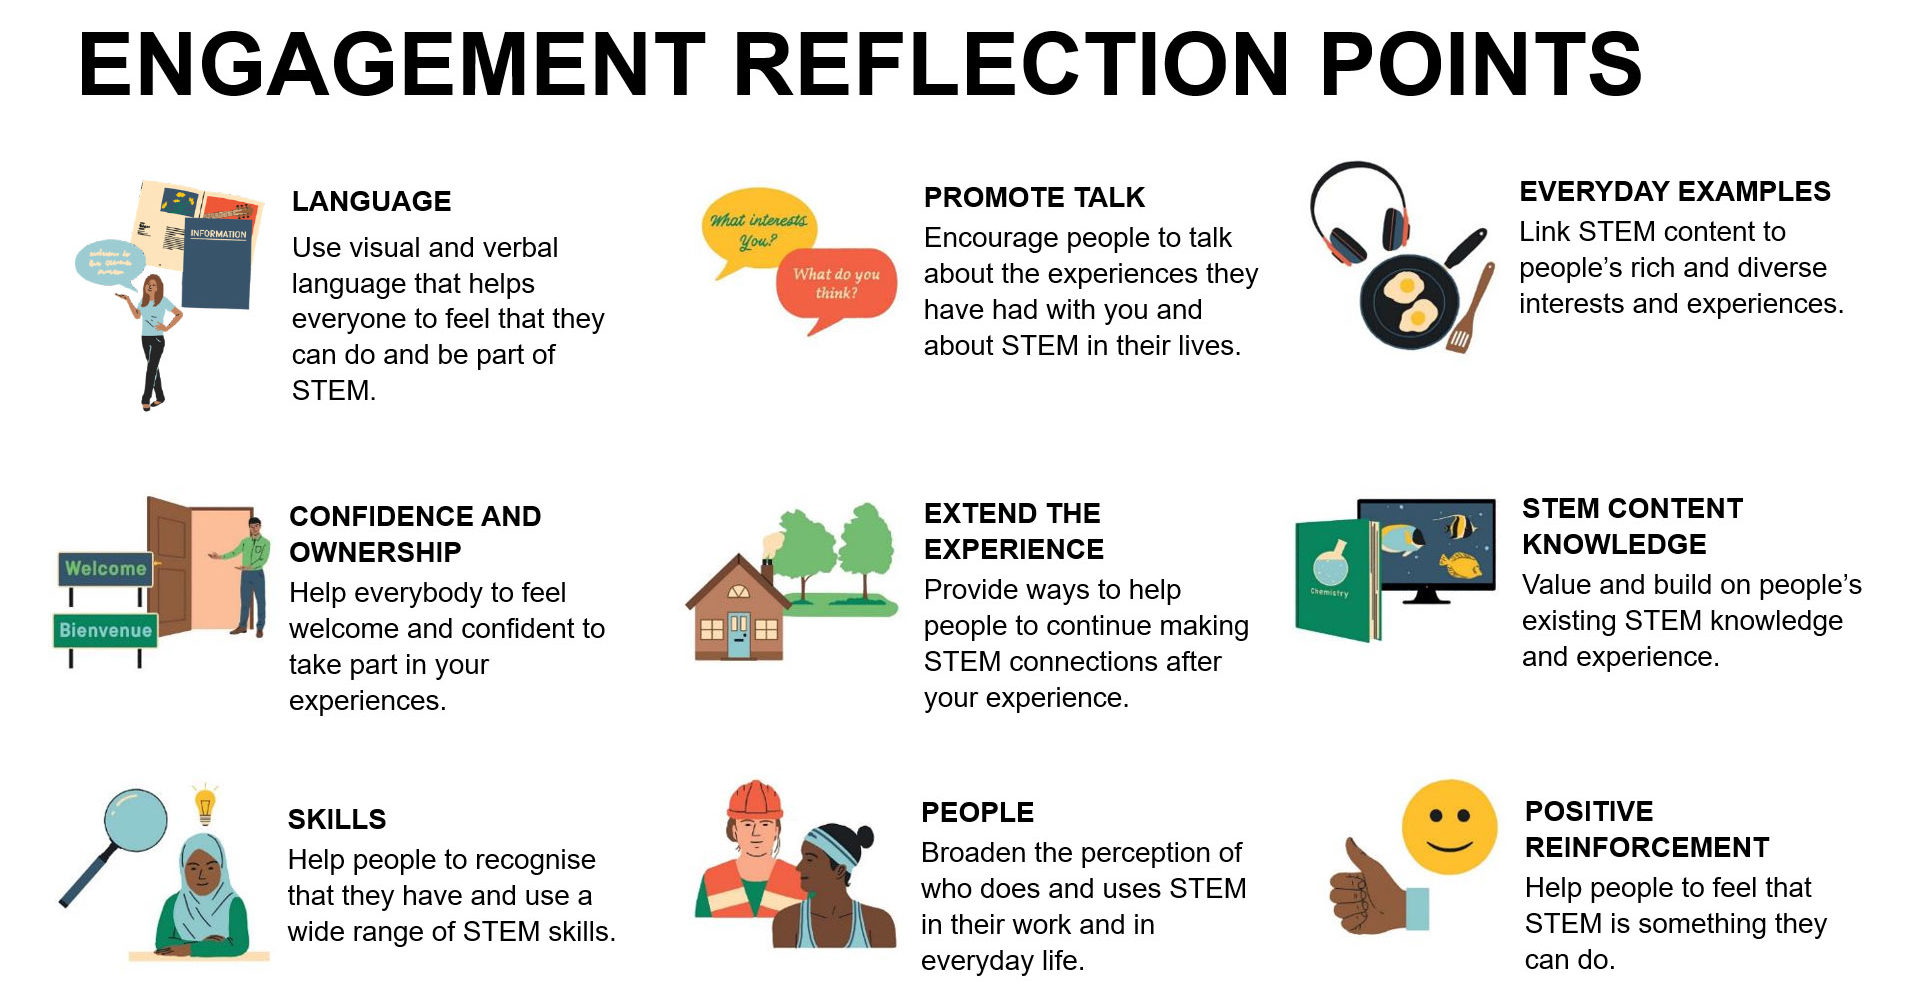 Our 9 Engagement Reflection Points for creating engaging STEM experiences: Language, Promote Talk, Everyday Examples, Confidence and Ownership, Extend the Experience, STEM Content Knowledge, Skills, People, Positive Reinforcement.